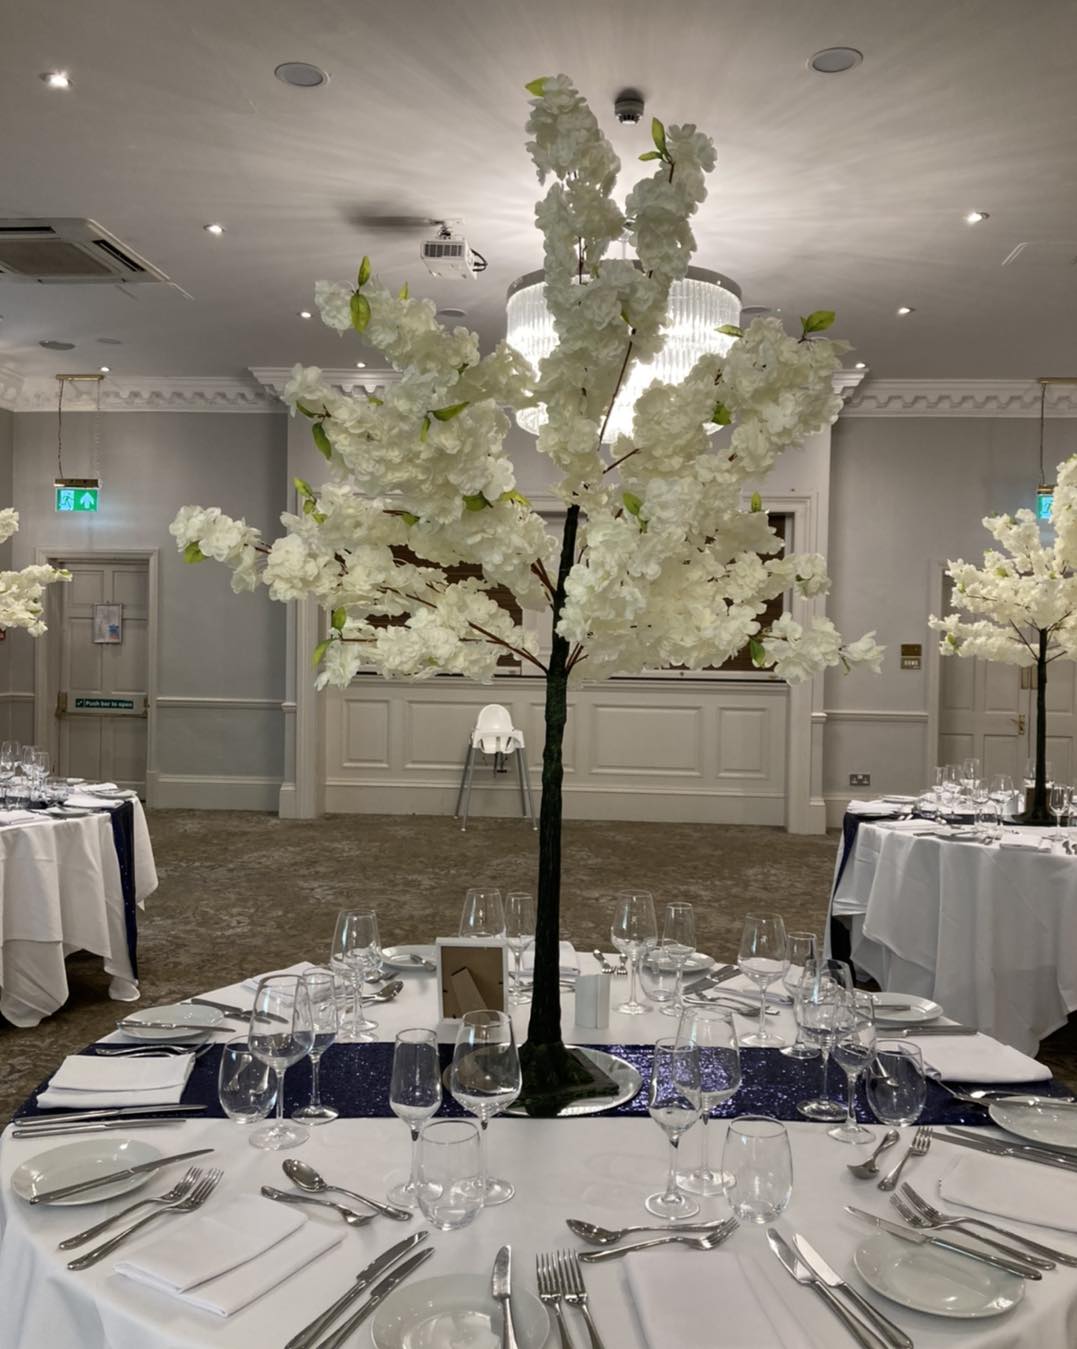 Large artificial cherry blossom tree for restaurant wedding decor |  Artificial cherry blossom tree, Flowering trees, Fake flowers decor